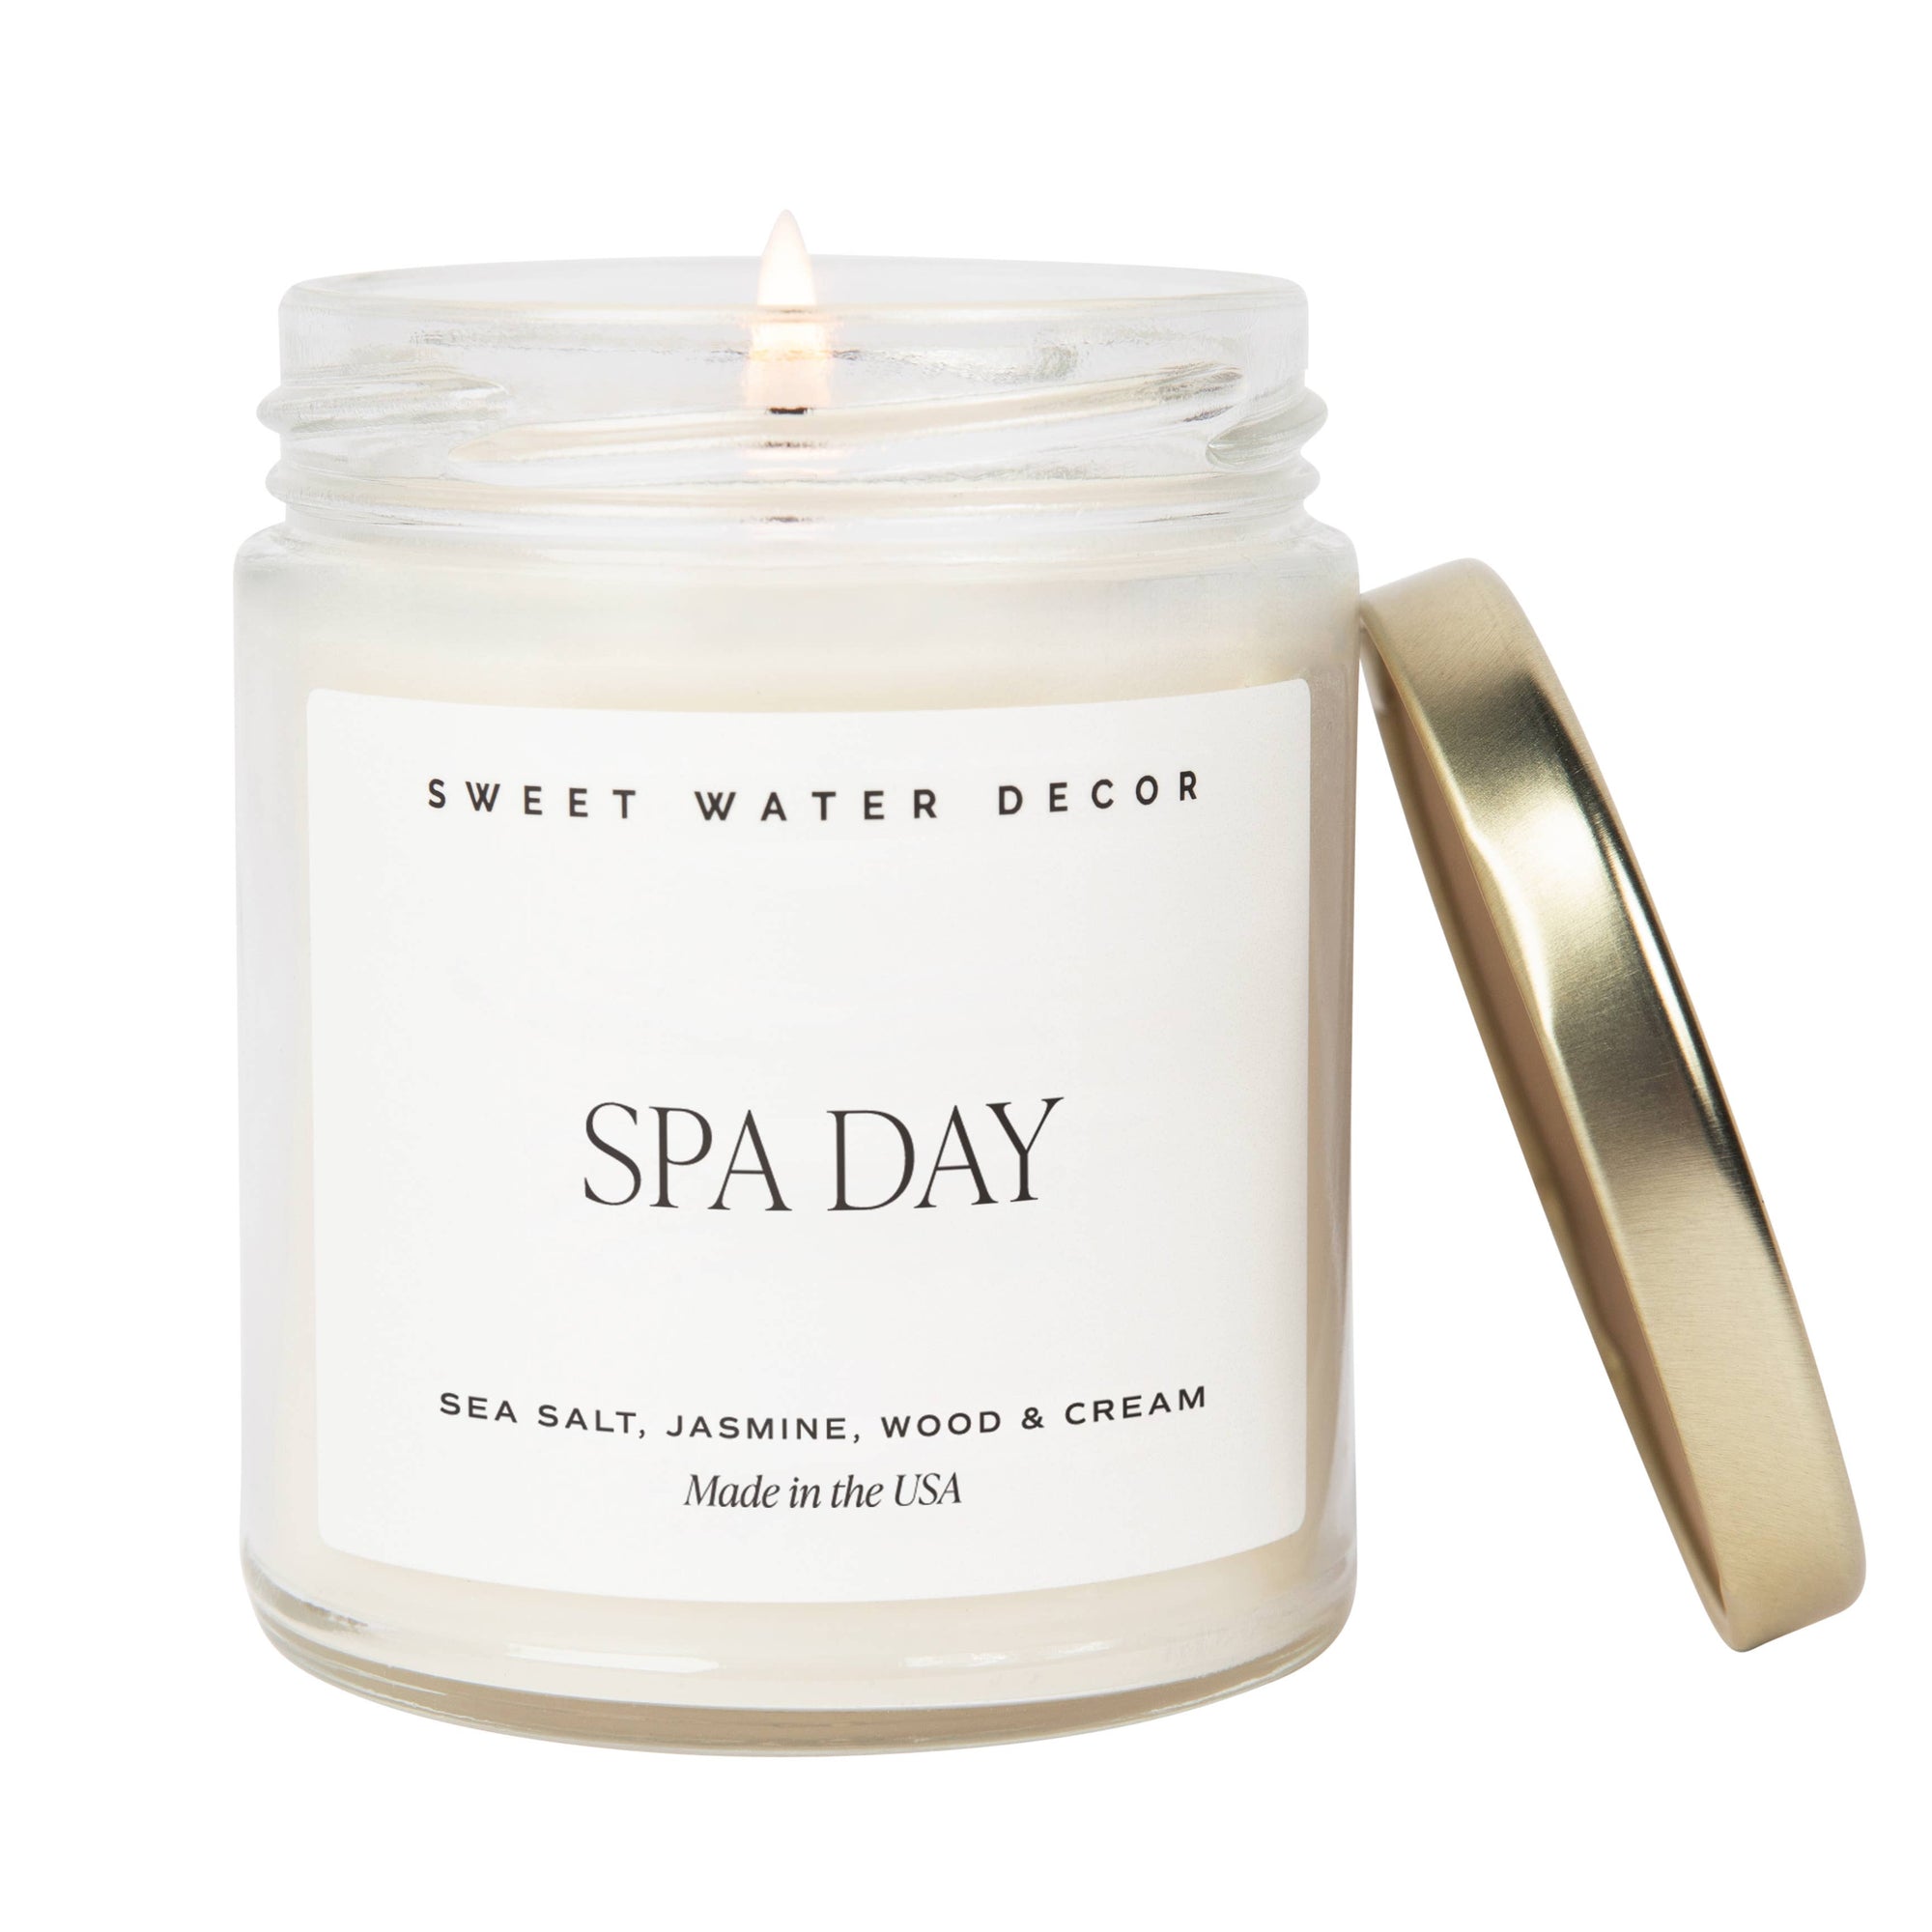 Spa Day 9 oz Soy Candle - The Preppy Bunny